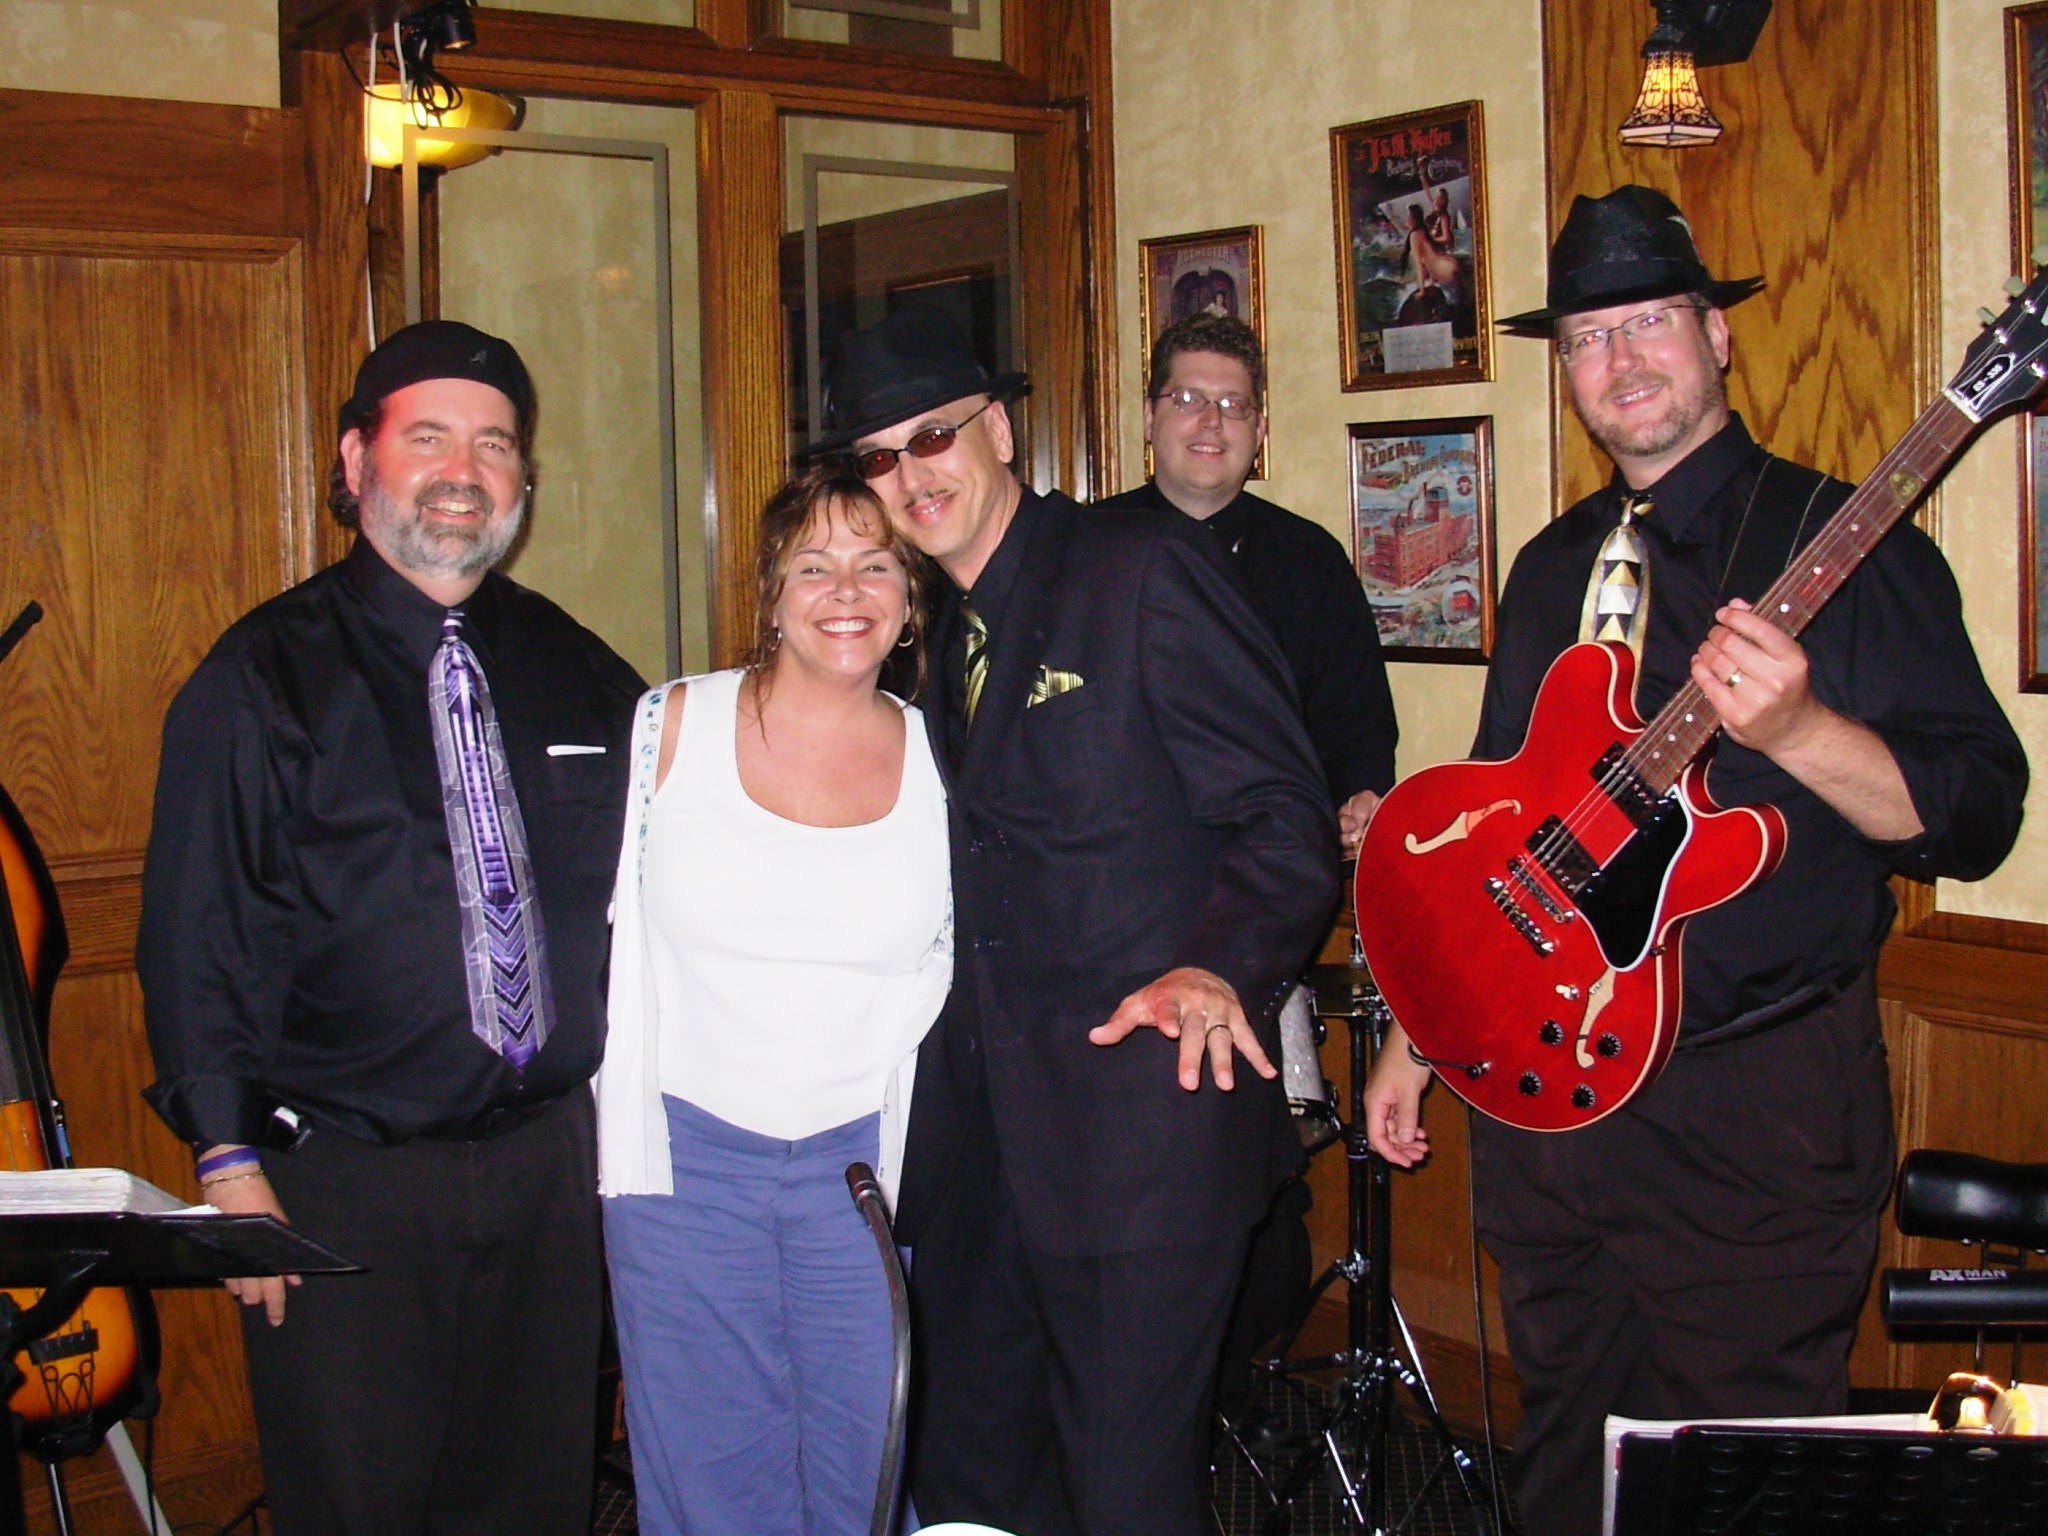 Toni and the boys at the Roosevelt Tavern June 2007
